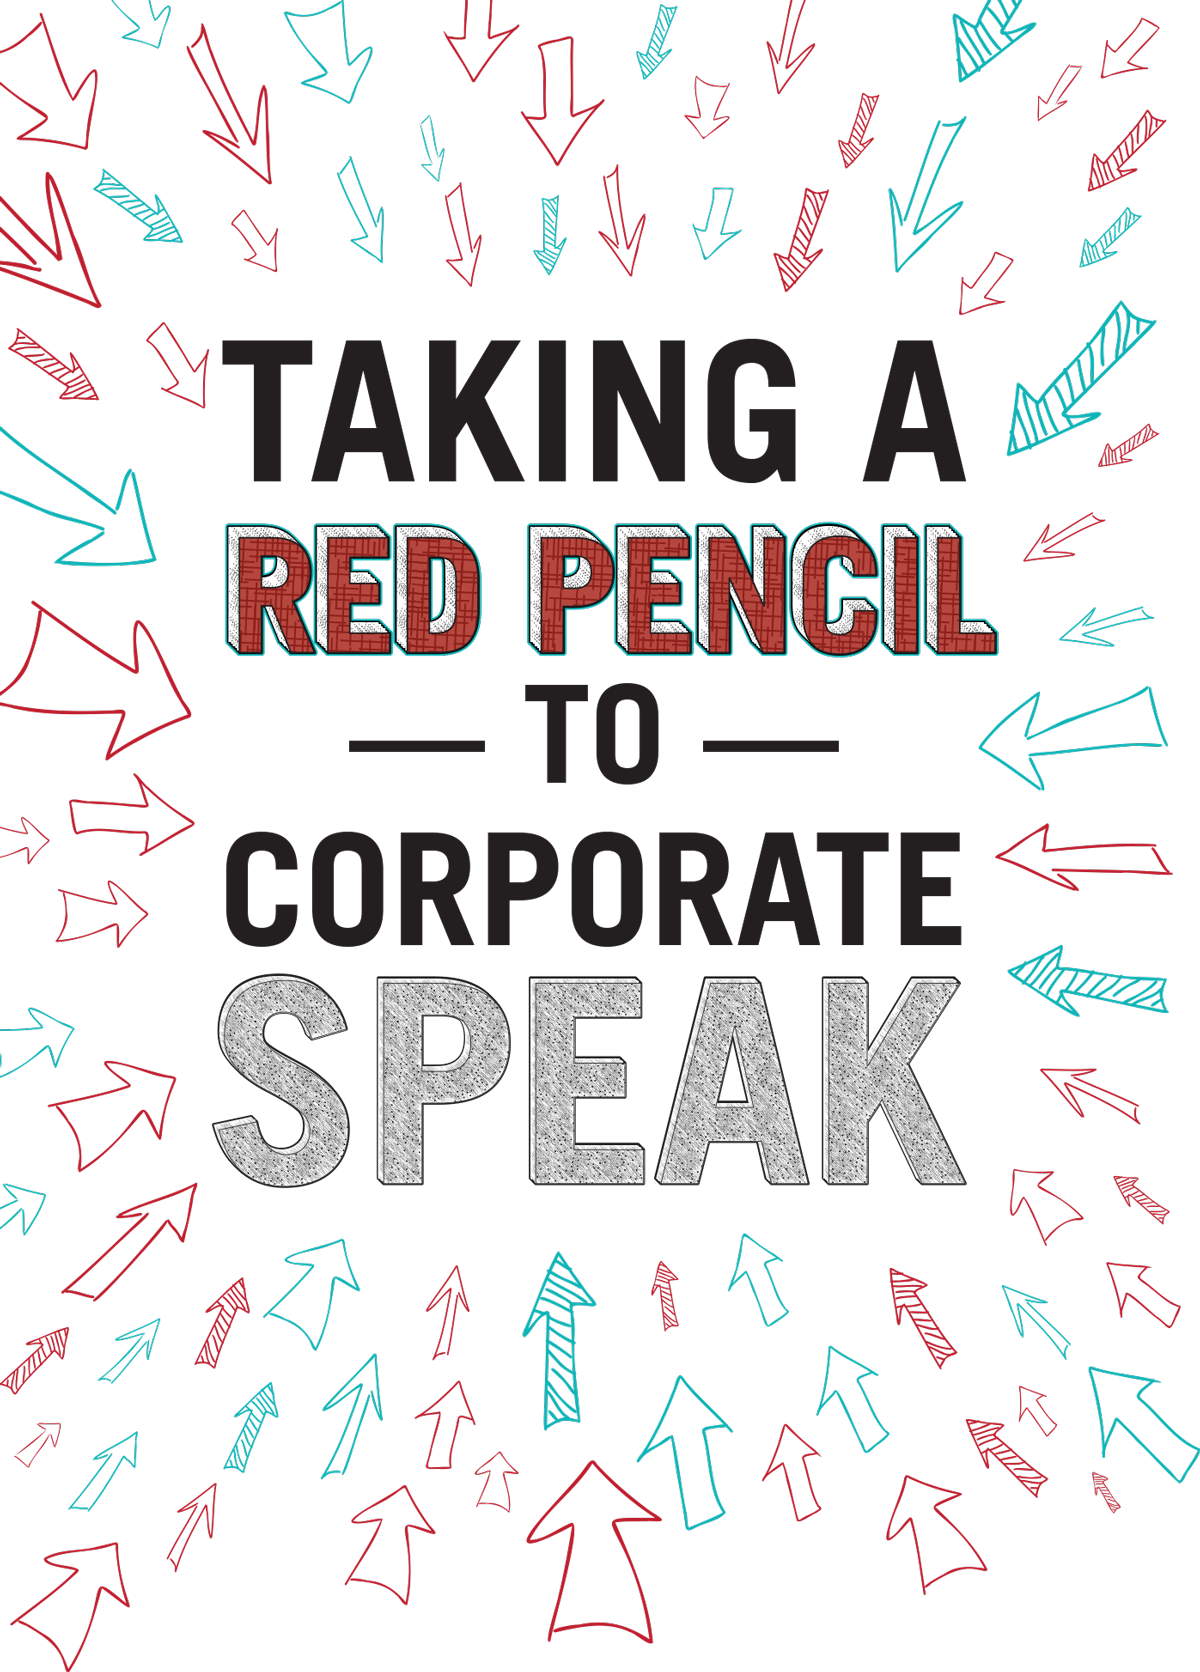 Taking a Red Pencil to Corporate Speak typography title surrounded by hand drawn arrows in red and blue